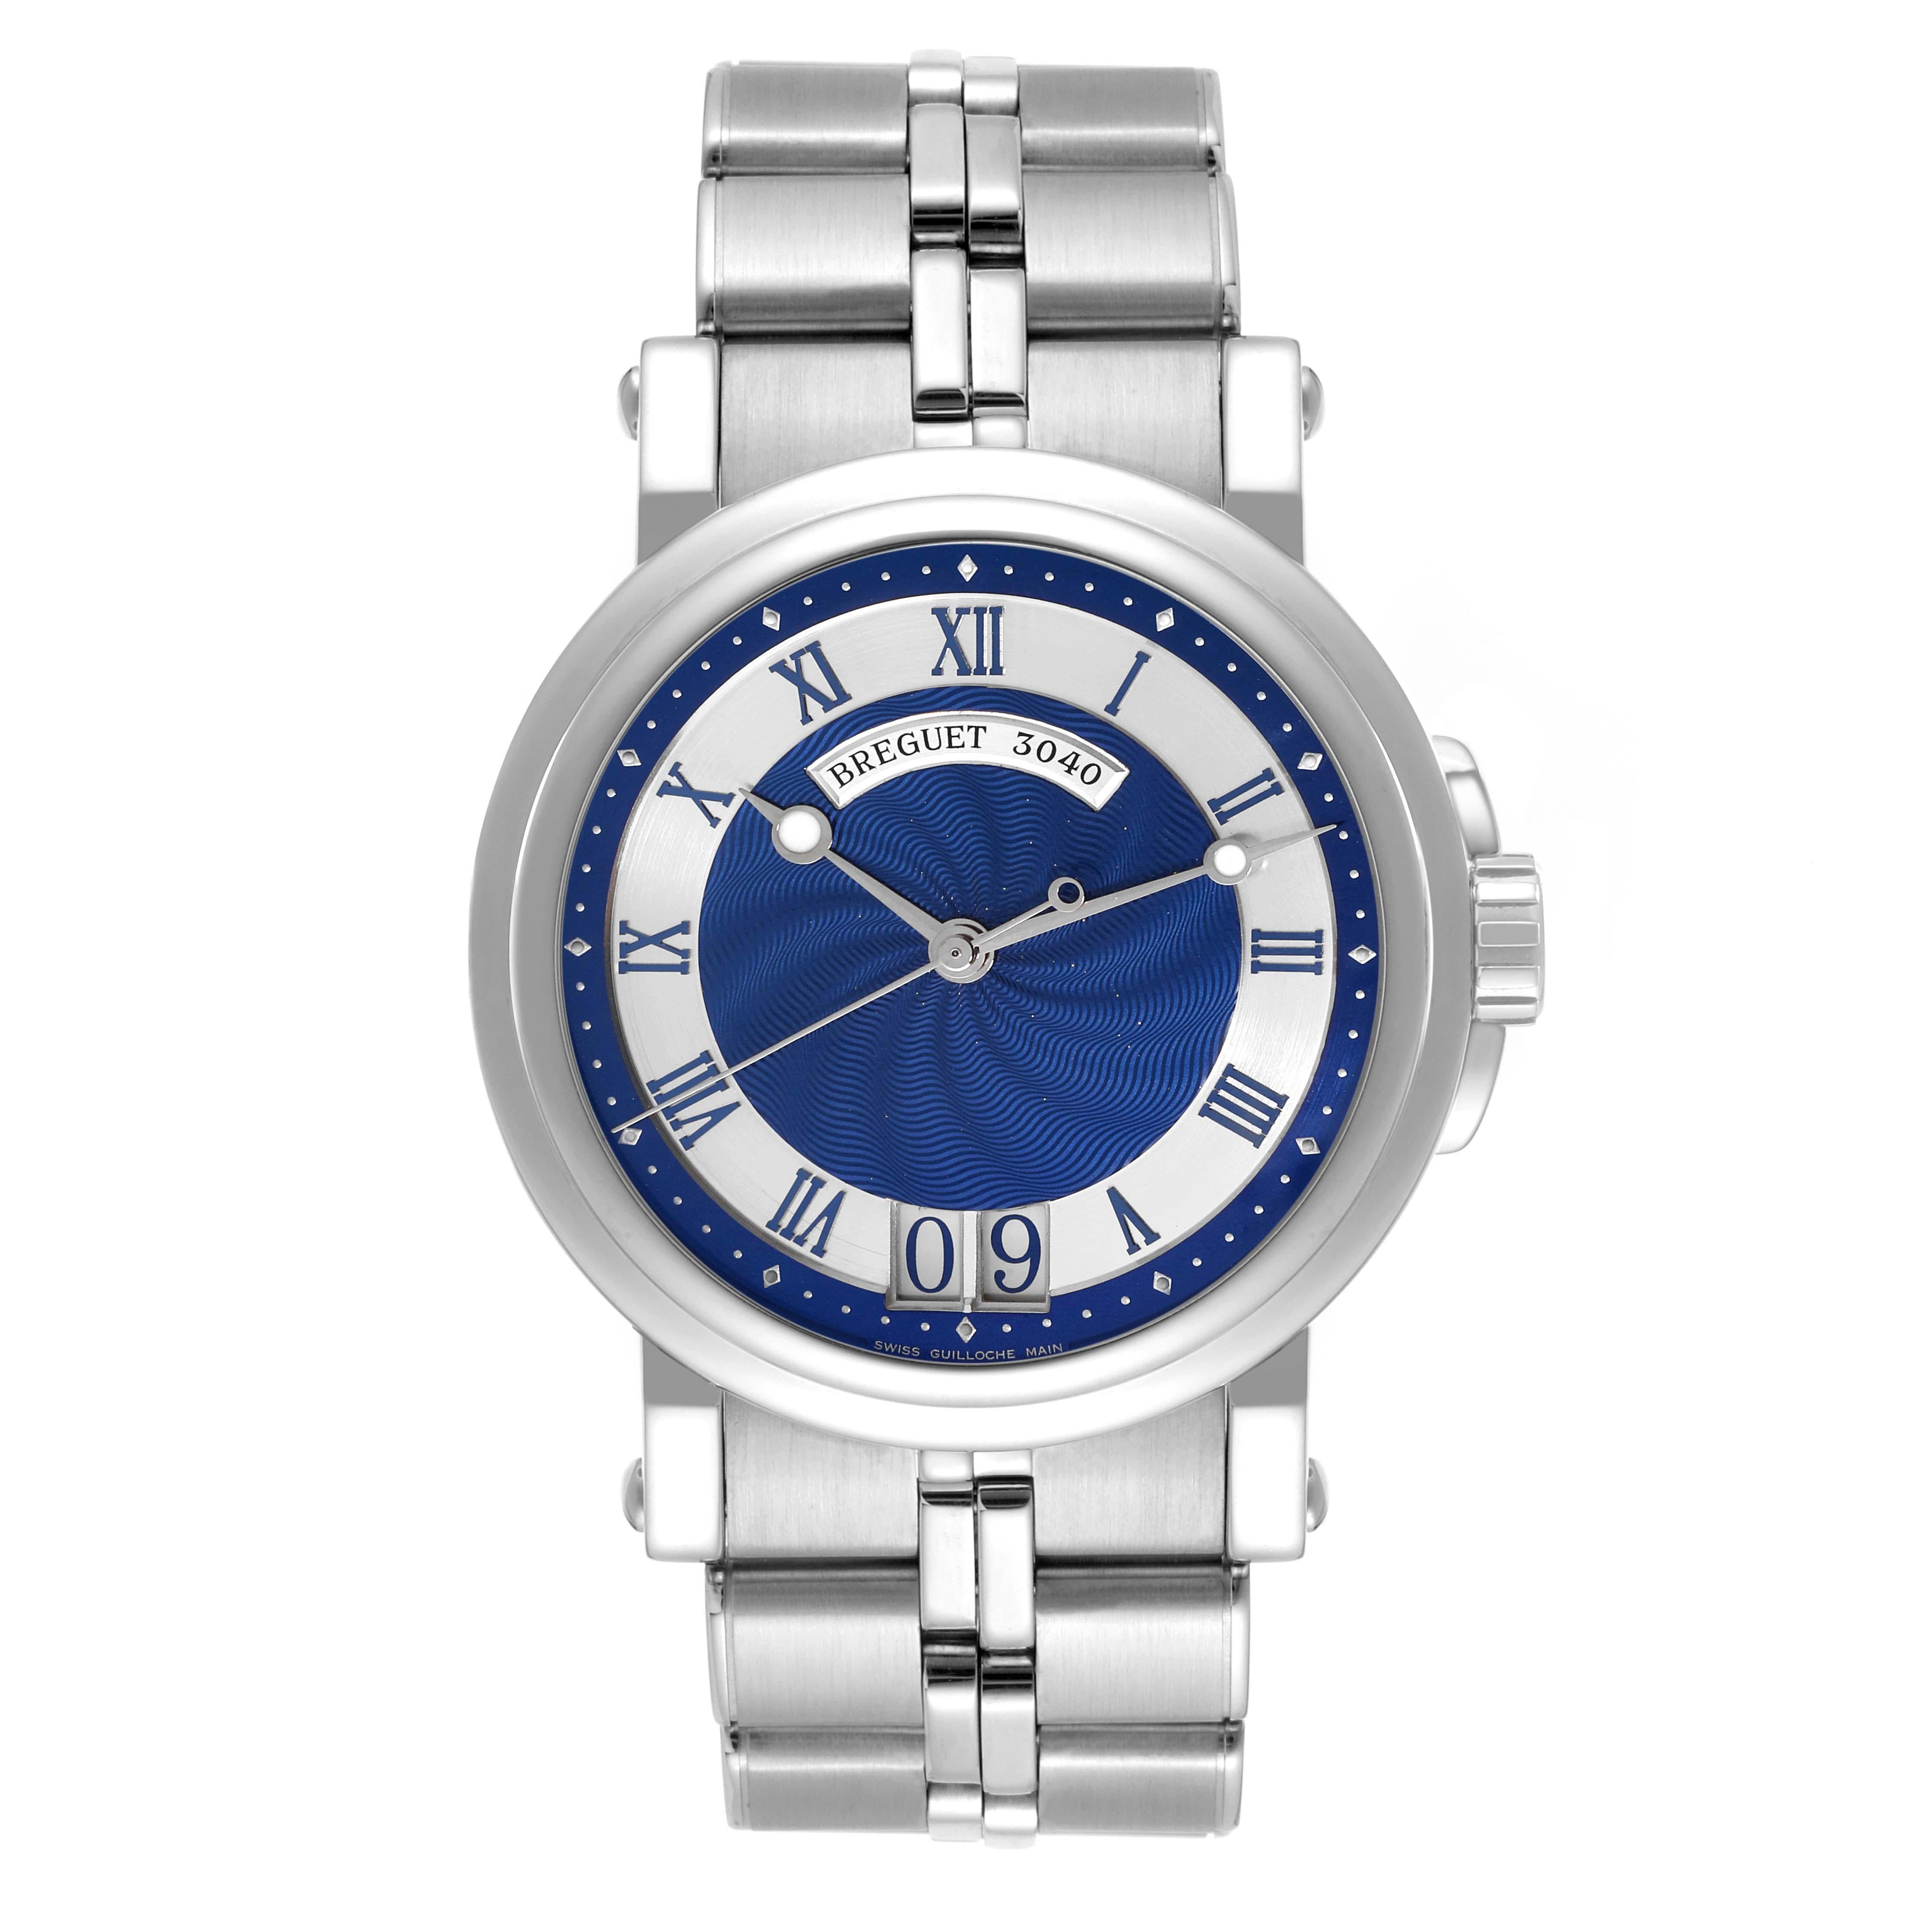 Breguet Marine Big Date Blue Dial Automatic Steel Mens Watch 5817ST. Automatic self-winding movement. Stainless steel coined edged case 39.0 mm in diameter. Stainless steel bezel. Scratch resistant sapphire crystal. Blue hand engraved guilloche